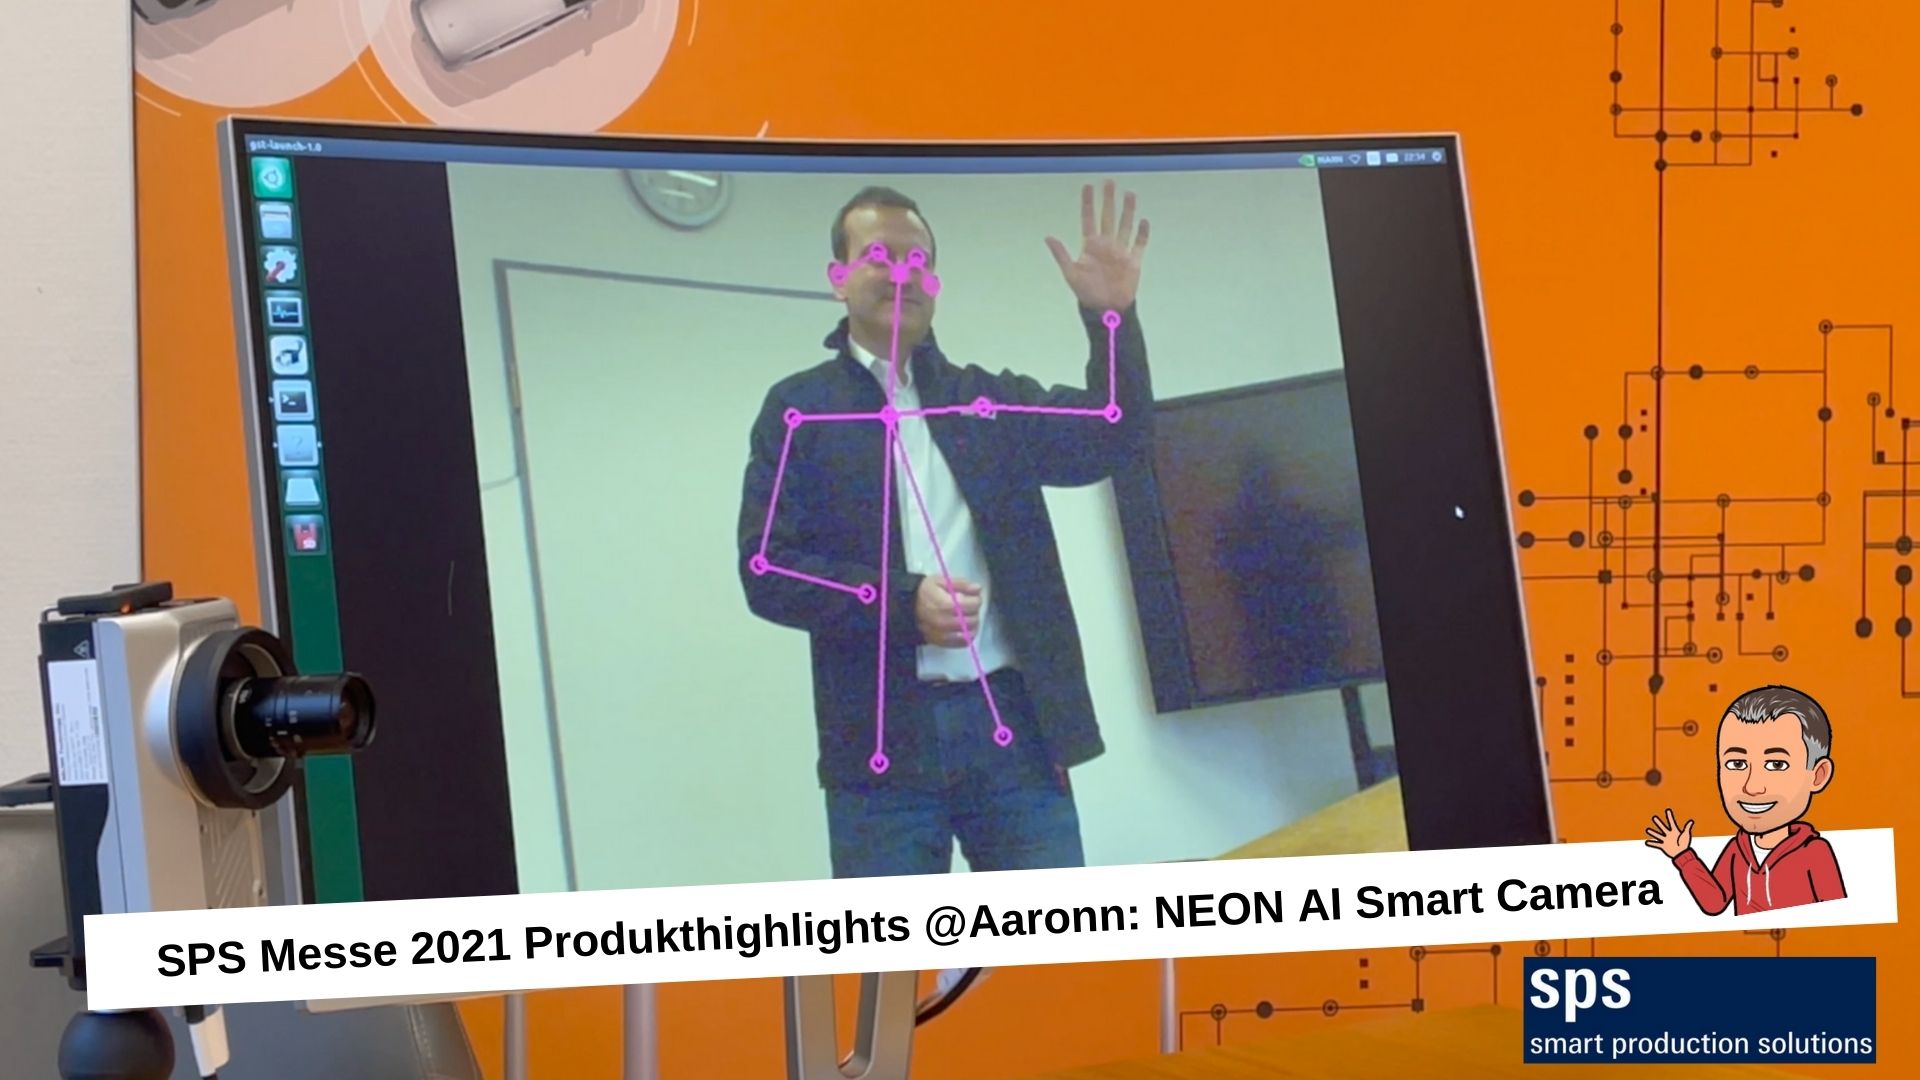 You are currently viewing SPS Messe 2021 Produkthiglights -NEON AI Smart Camera